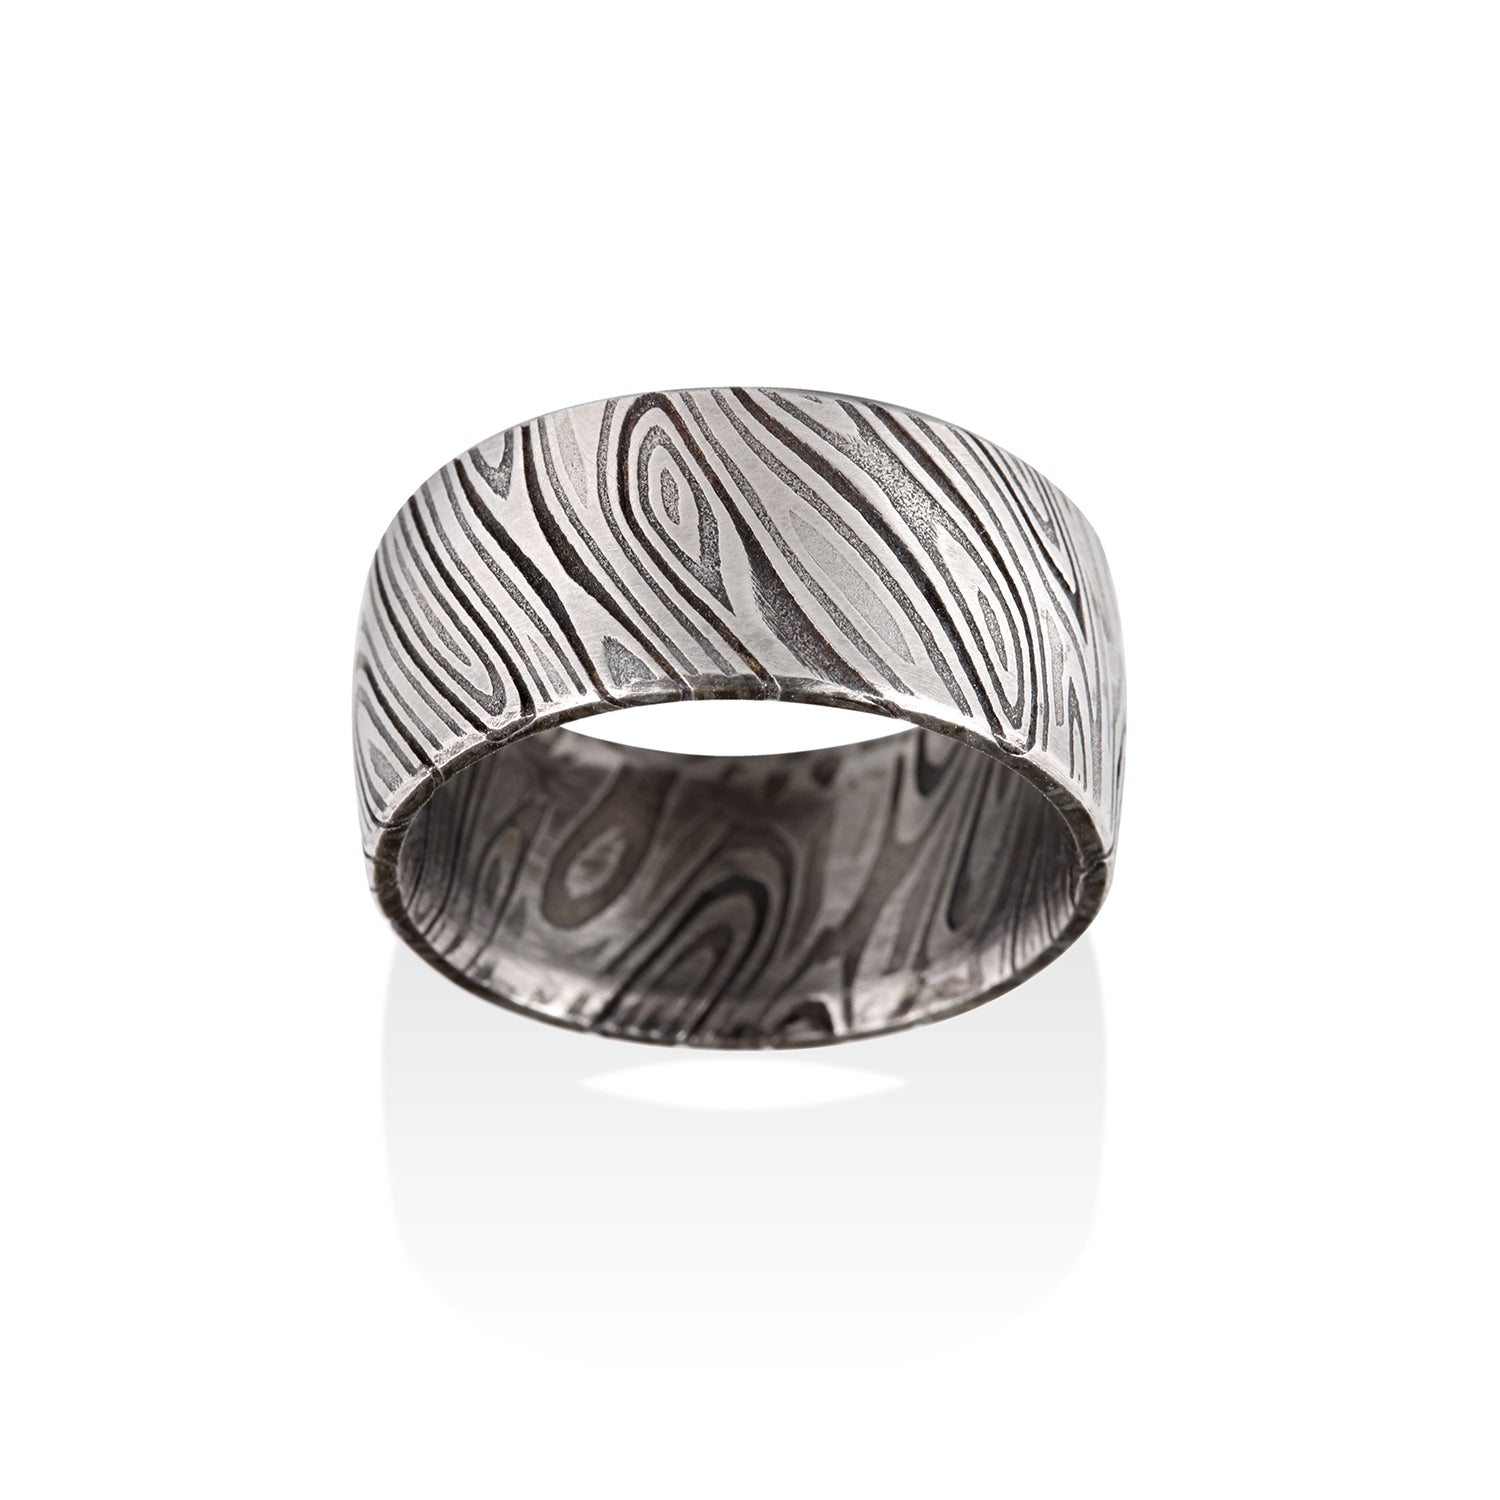 Triple White Damascus Steel Ring by Chris Ploof - Talisman Collection Fine Jewelers